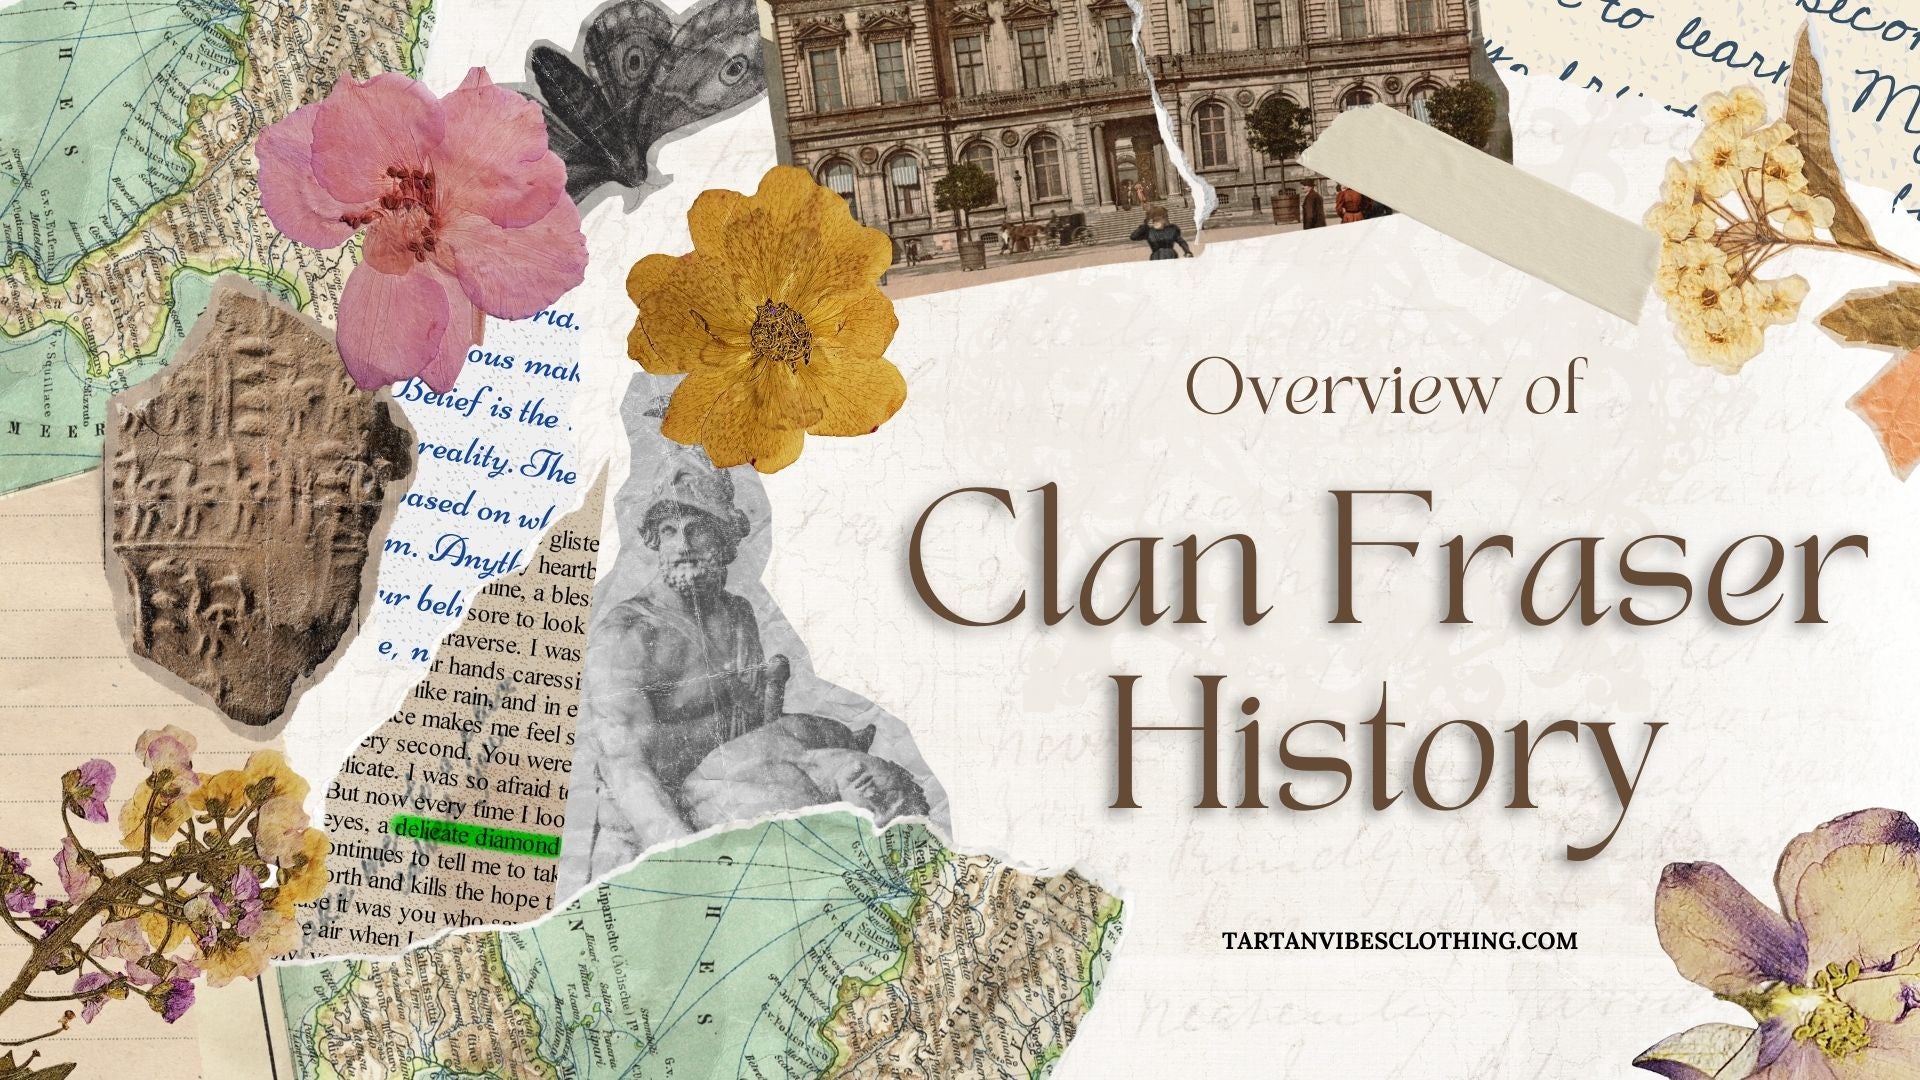 Overview of Clan Fraser History